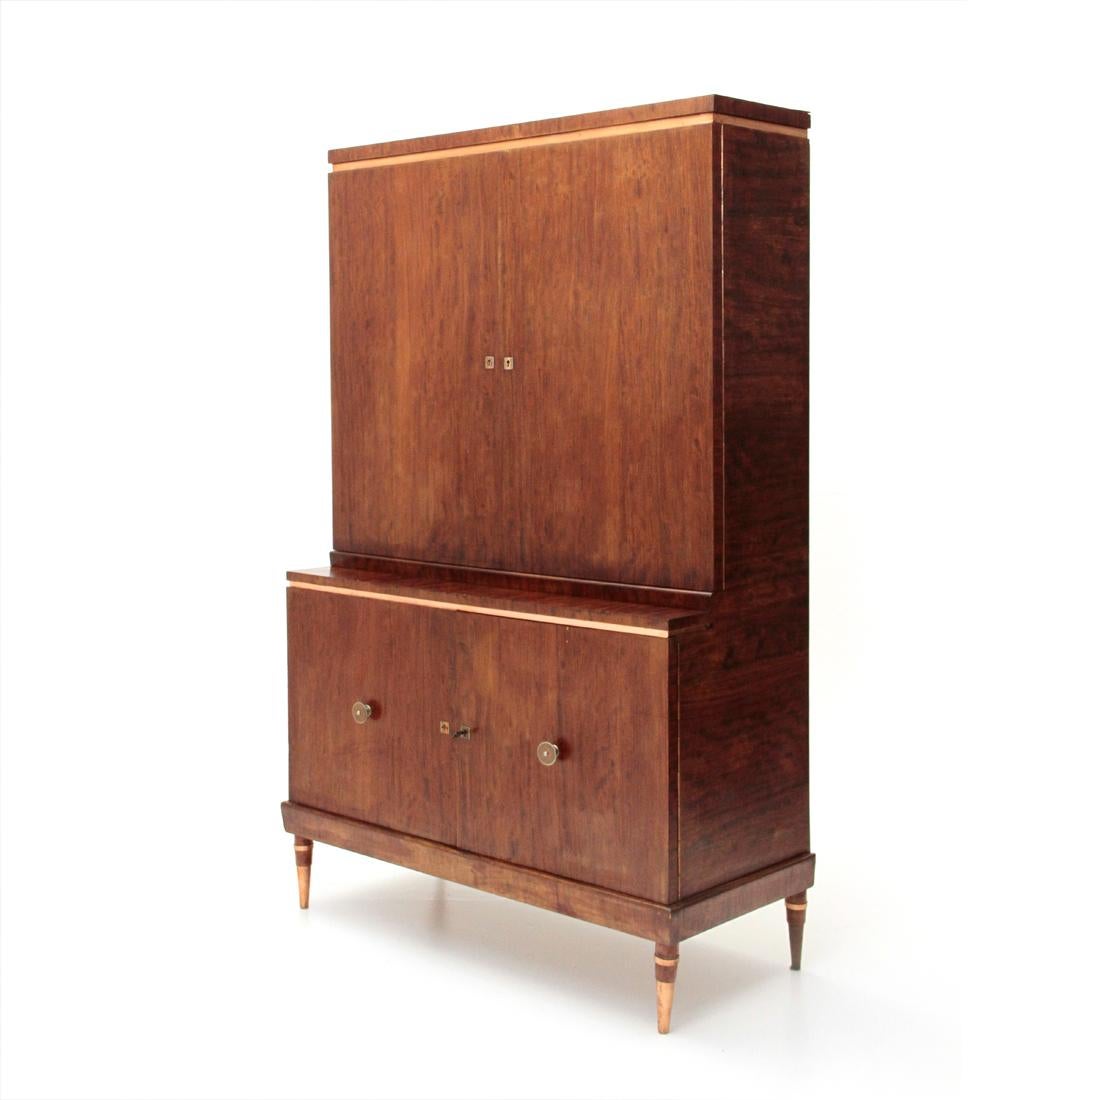 Italian Modernist Cabinet with Copper Details, 1940s